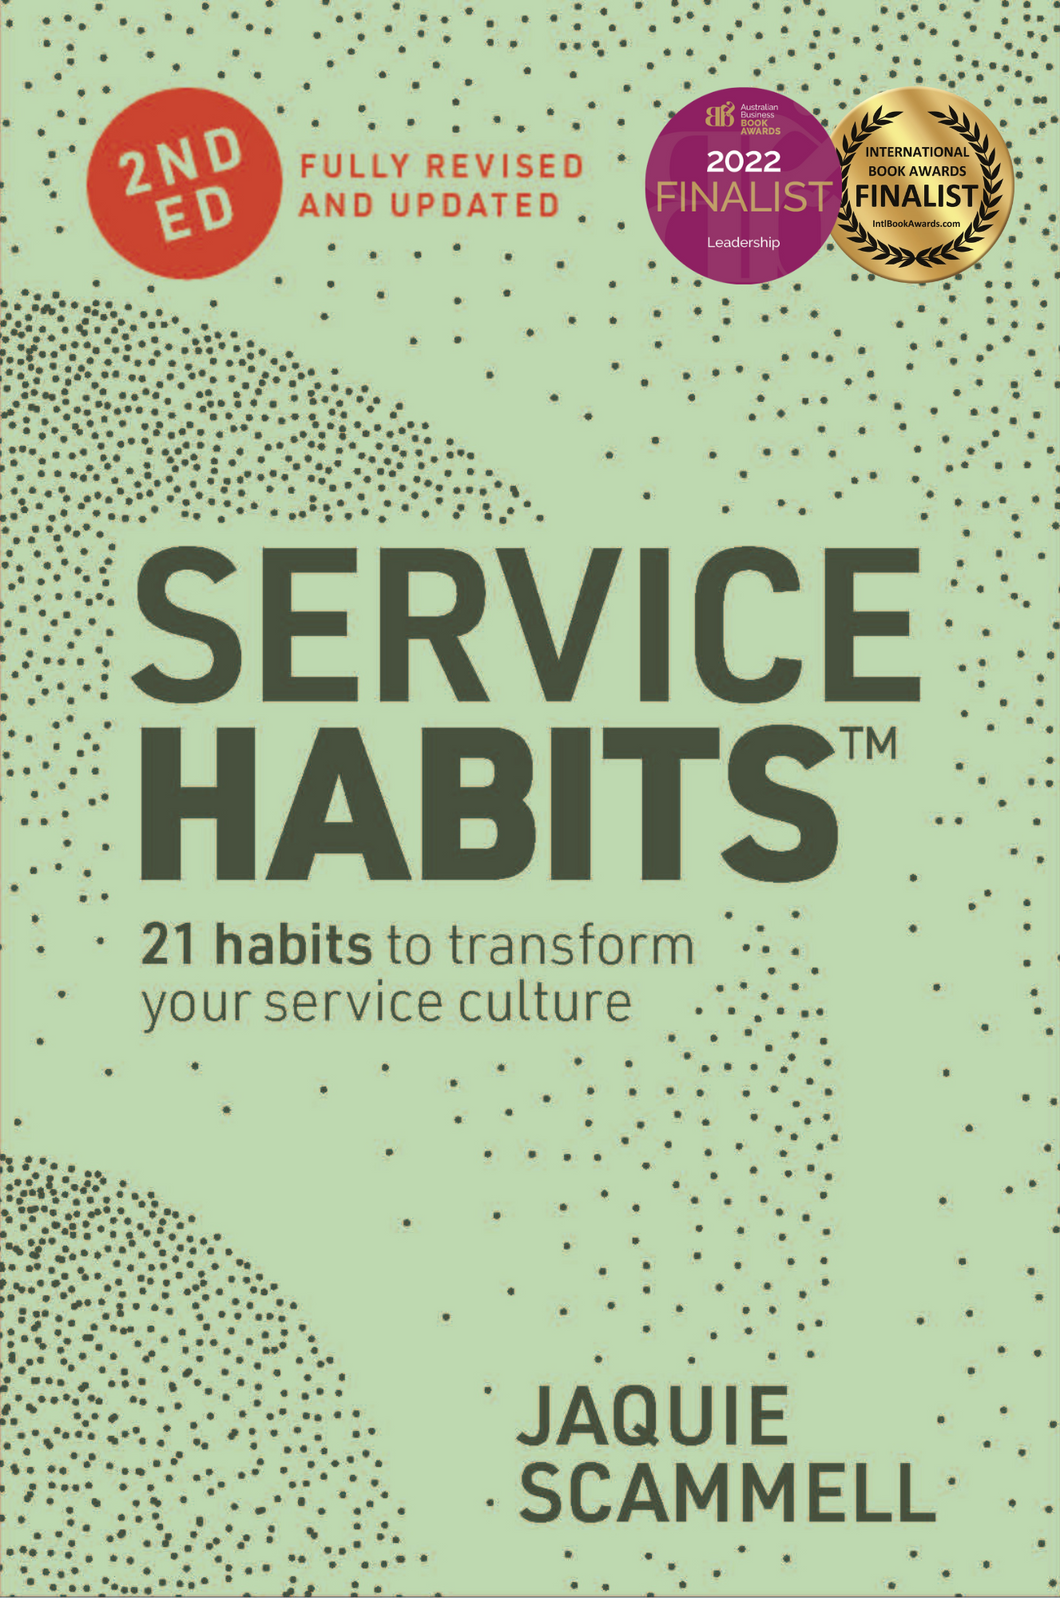 Service Habits 2nd Edition <br><i><small> by Jaquie Scammell </i></small>